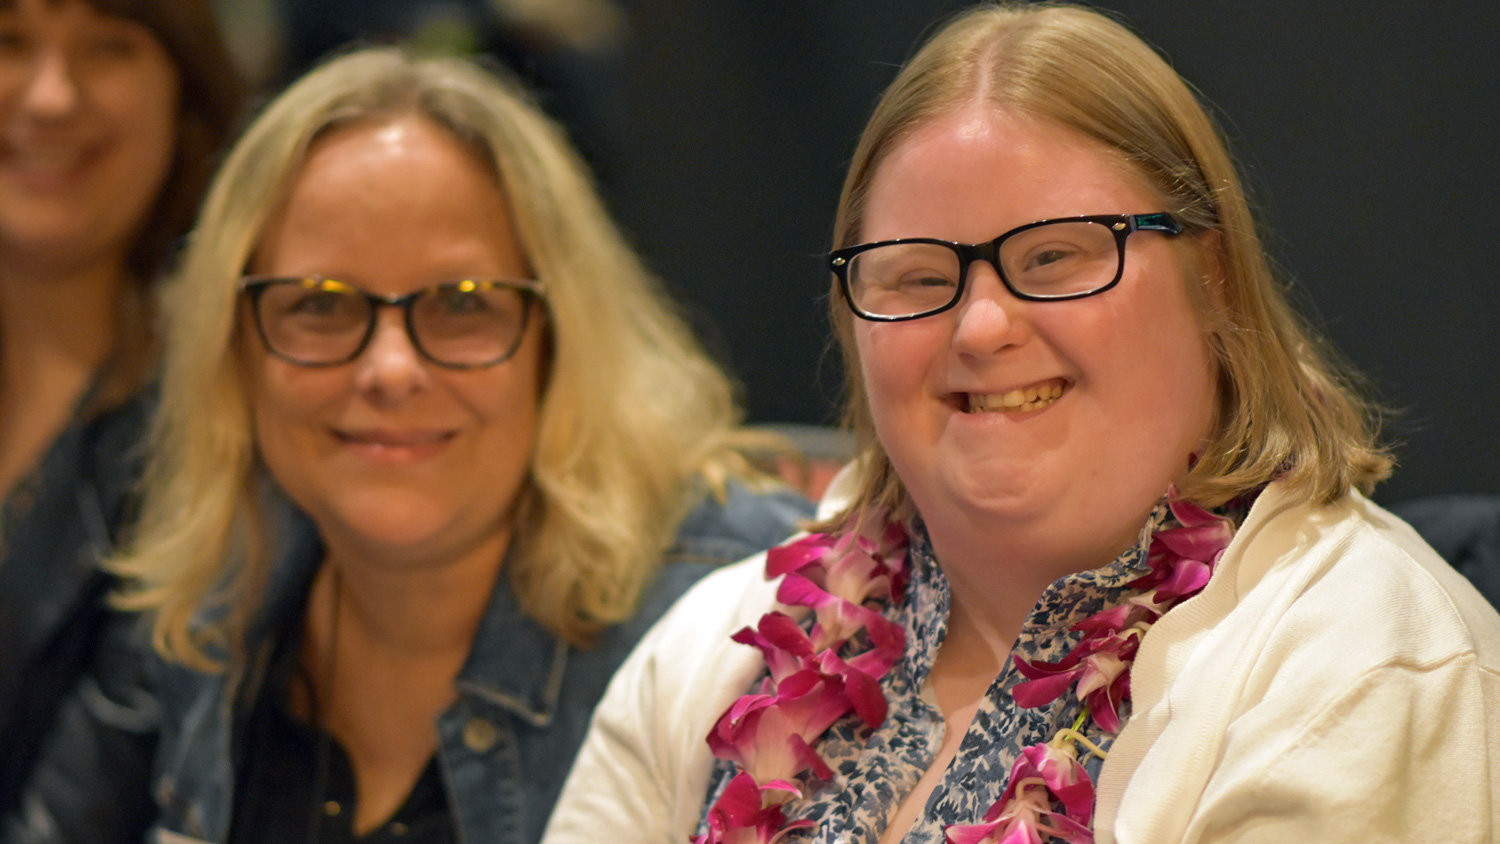 Transition Academy graduate Allison Gollehon (right) is all smiles alongside her teachers at the combined graduation ceremony with Project Search on June 10, 2022.